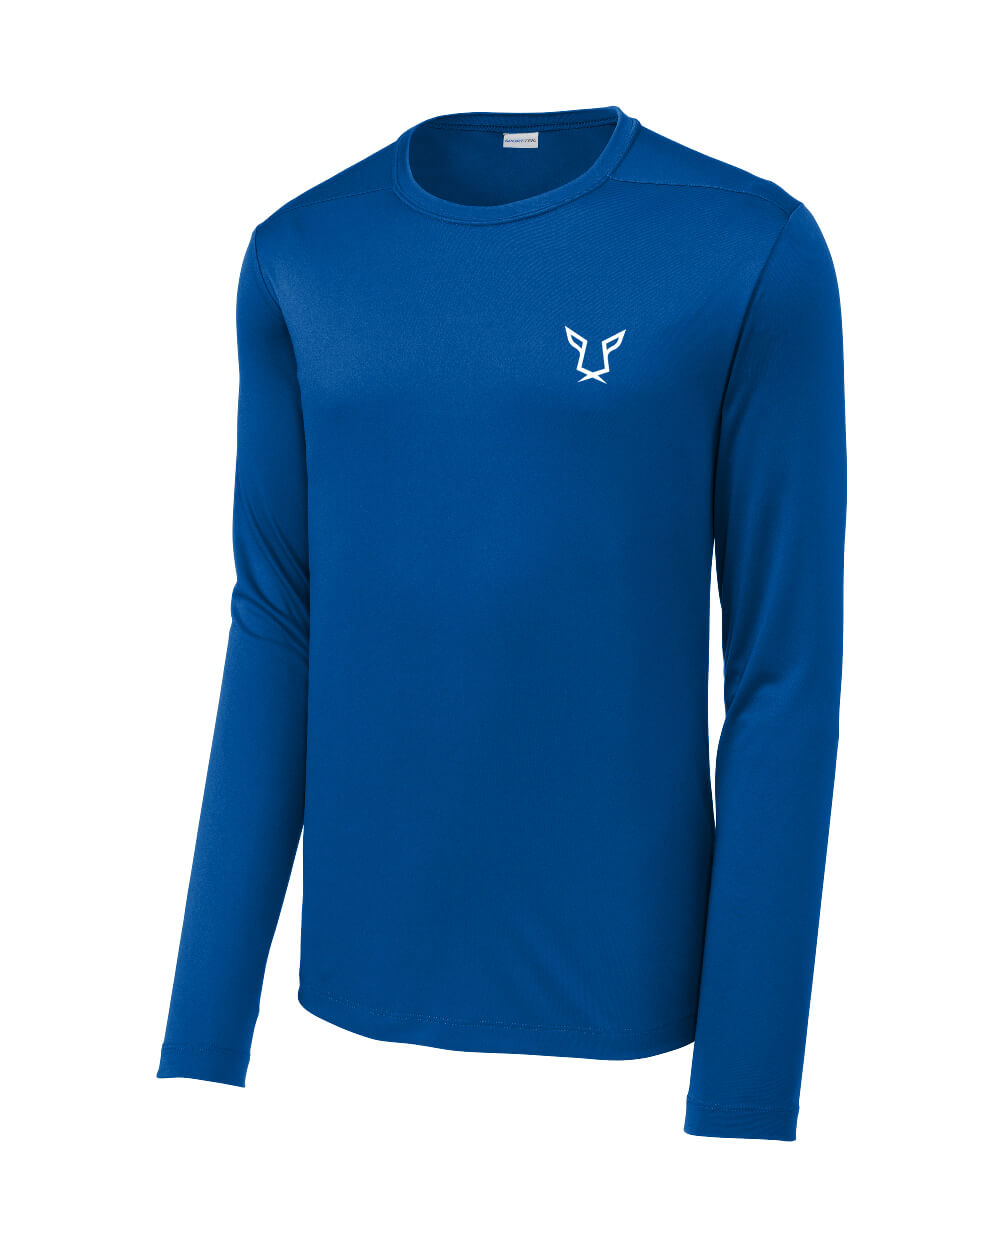 Men's Navy Evolution Performance Long Sleeve Tee by Odisi Apparel